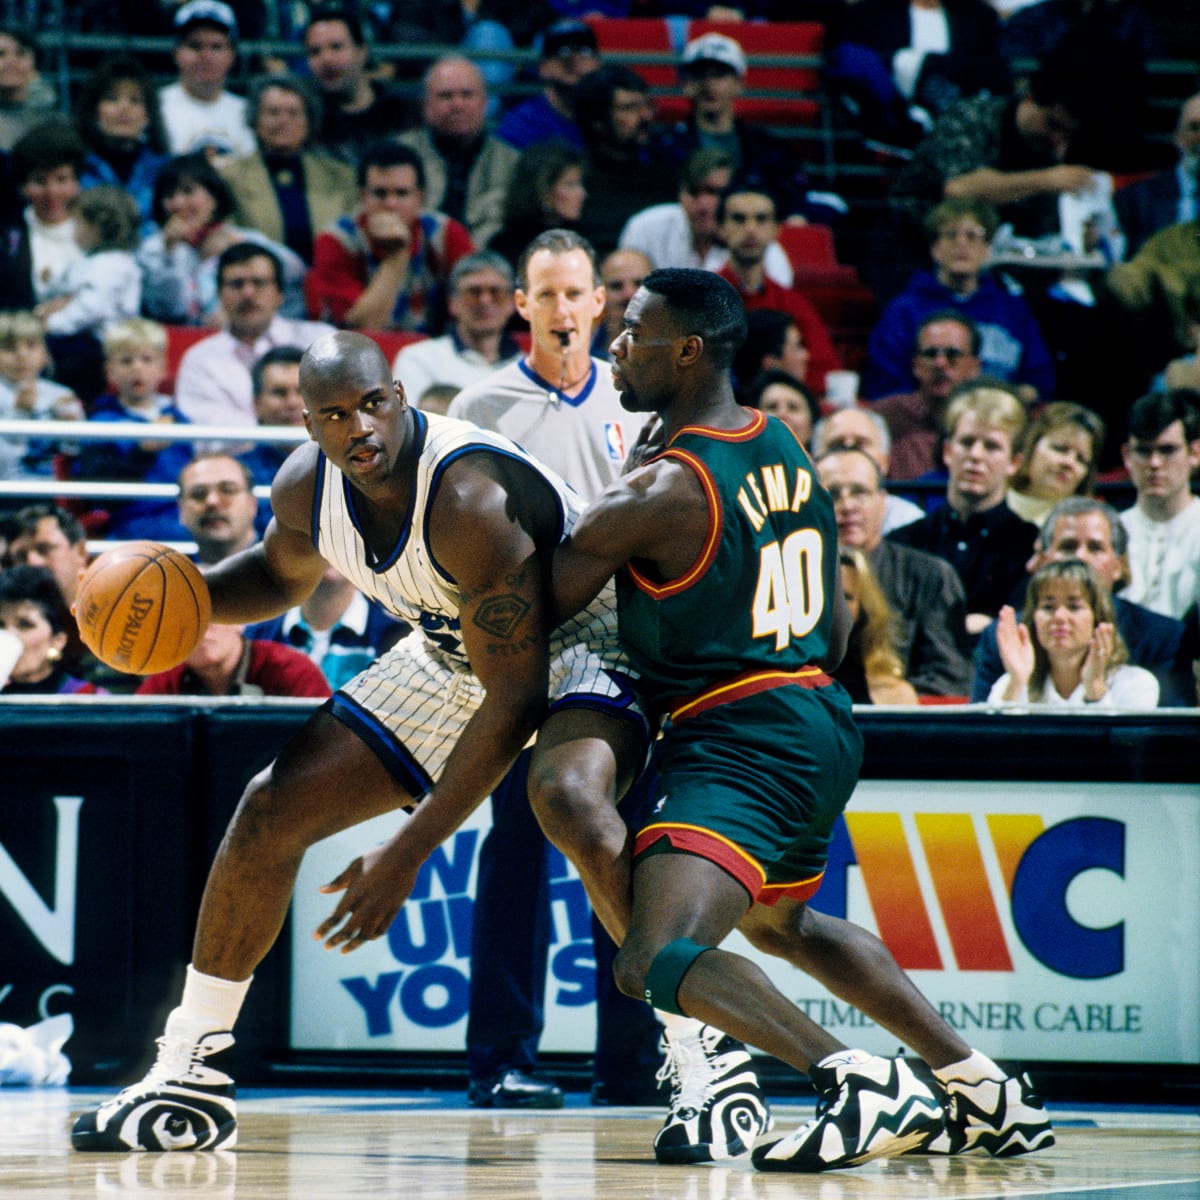 Shaquille O'Neal's Top 10 In-Game Sneakers